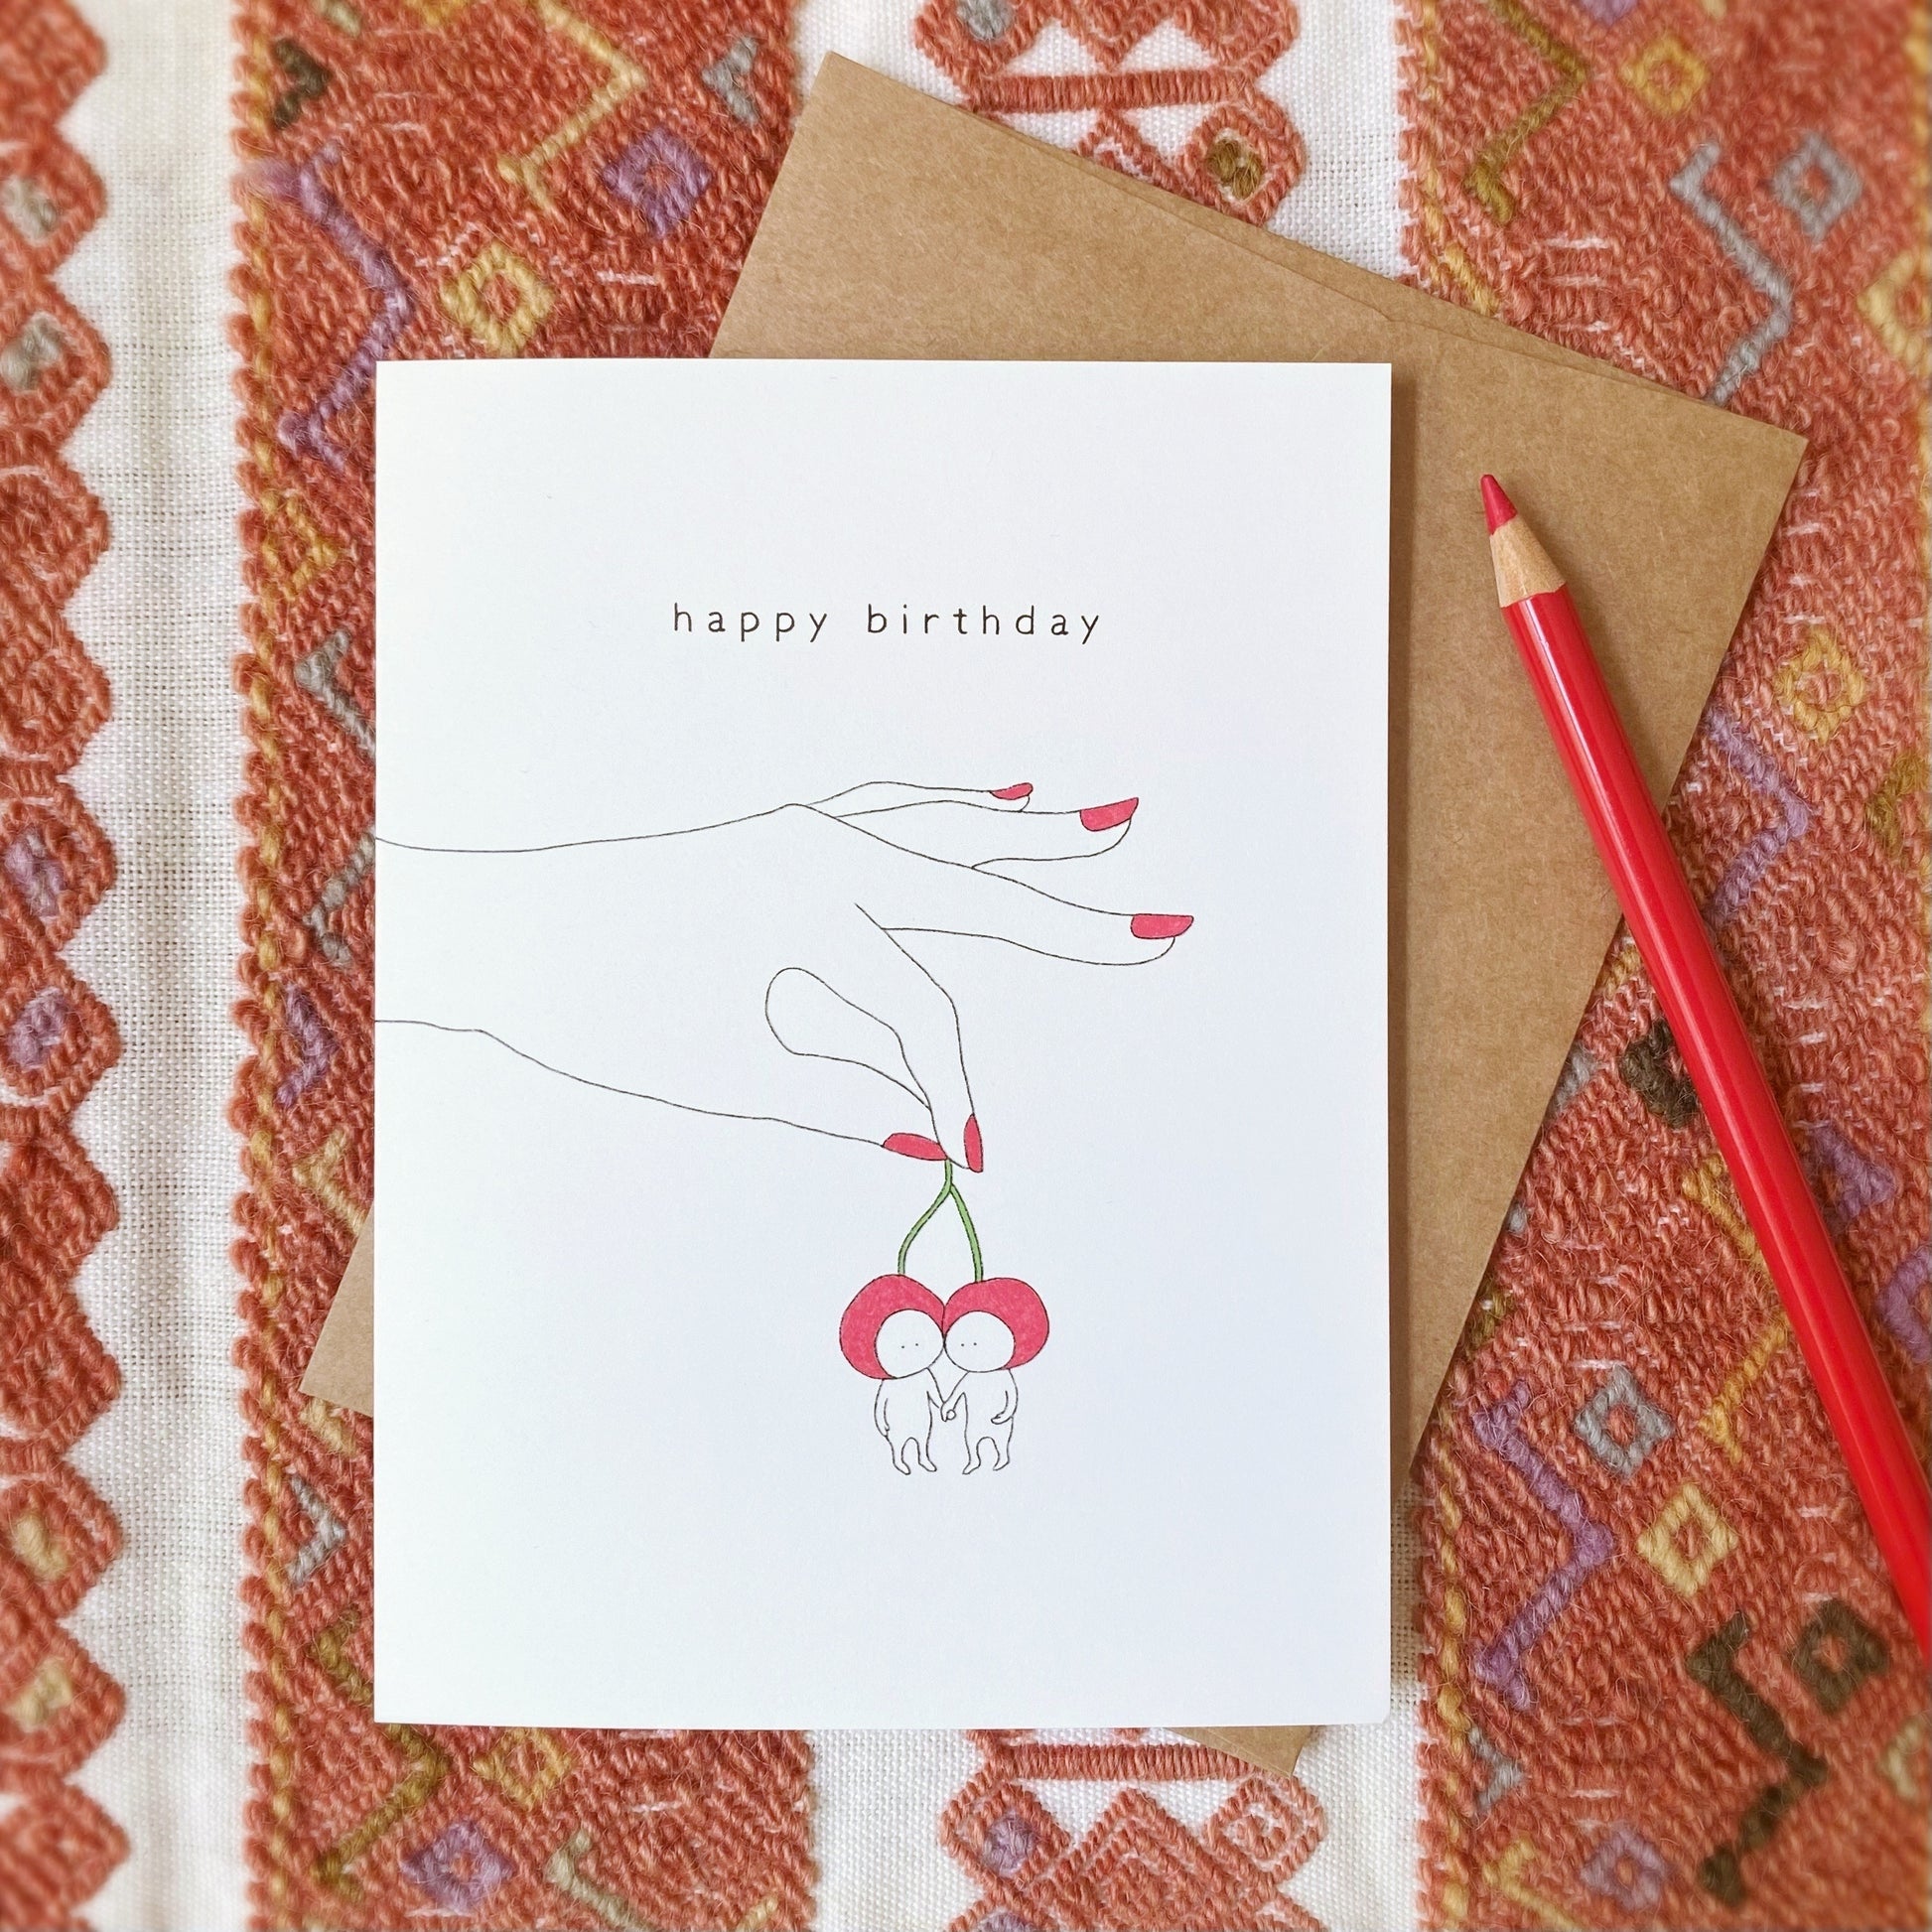 Cute and Simple Birthday Card Set with two cherry sisters holding hands 